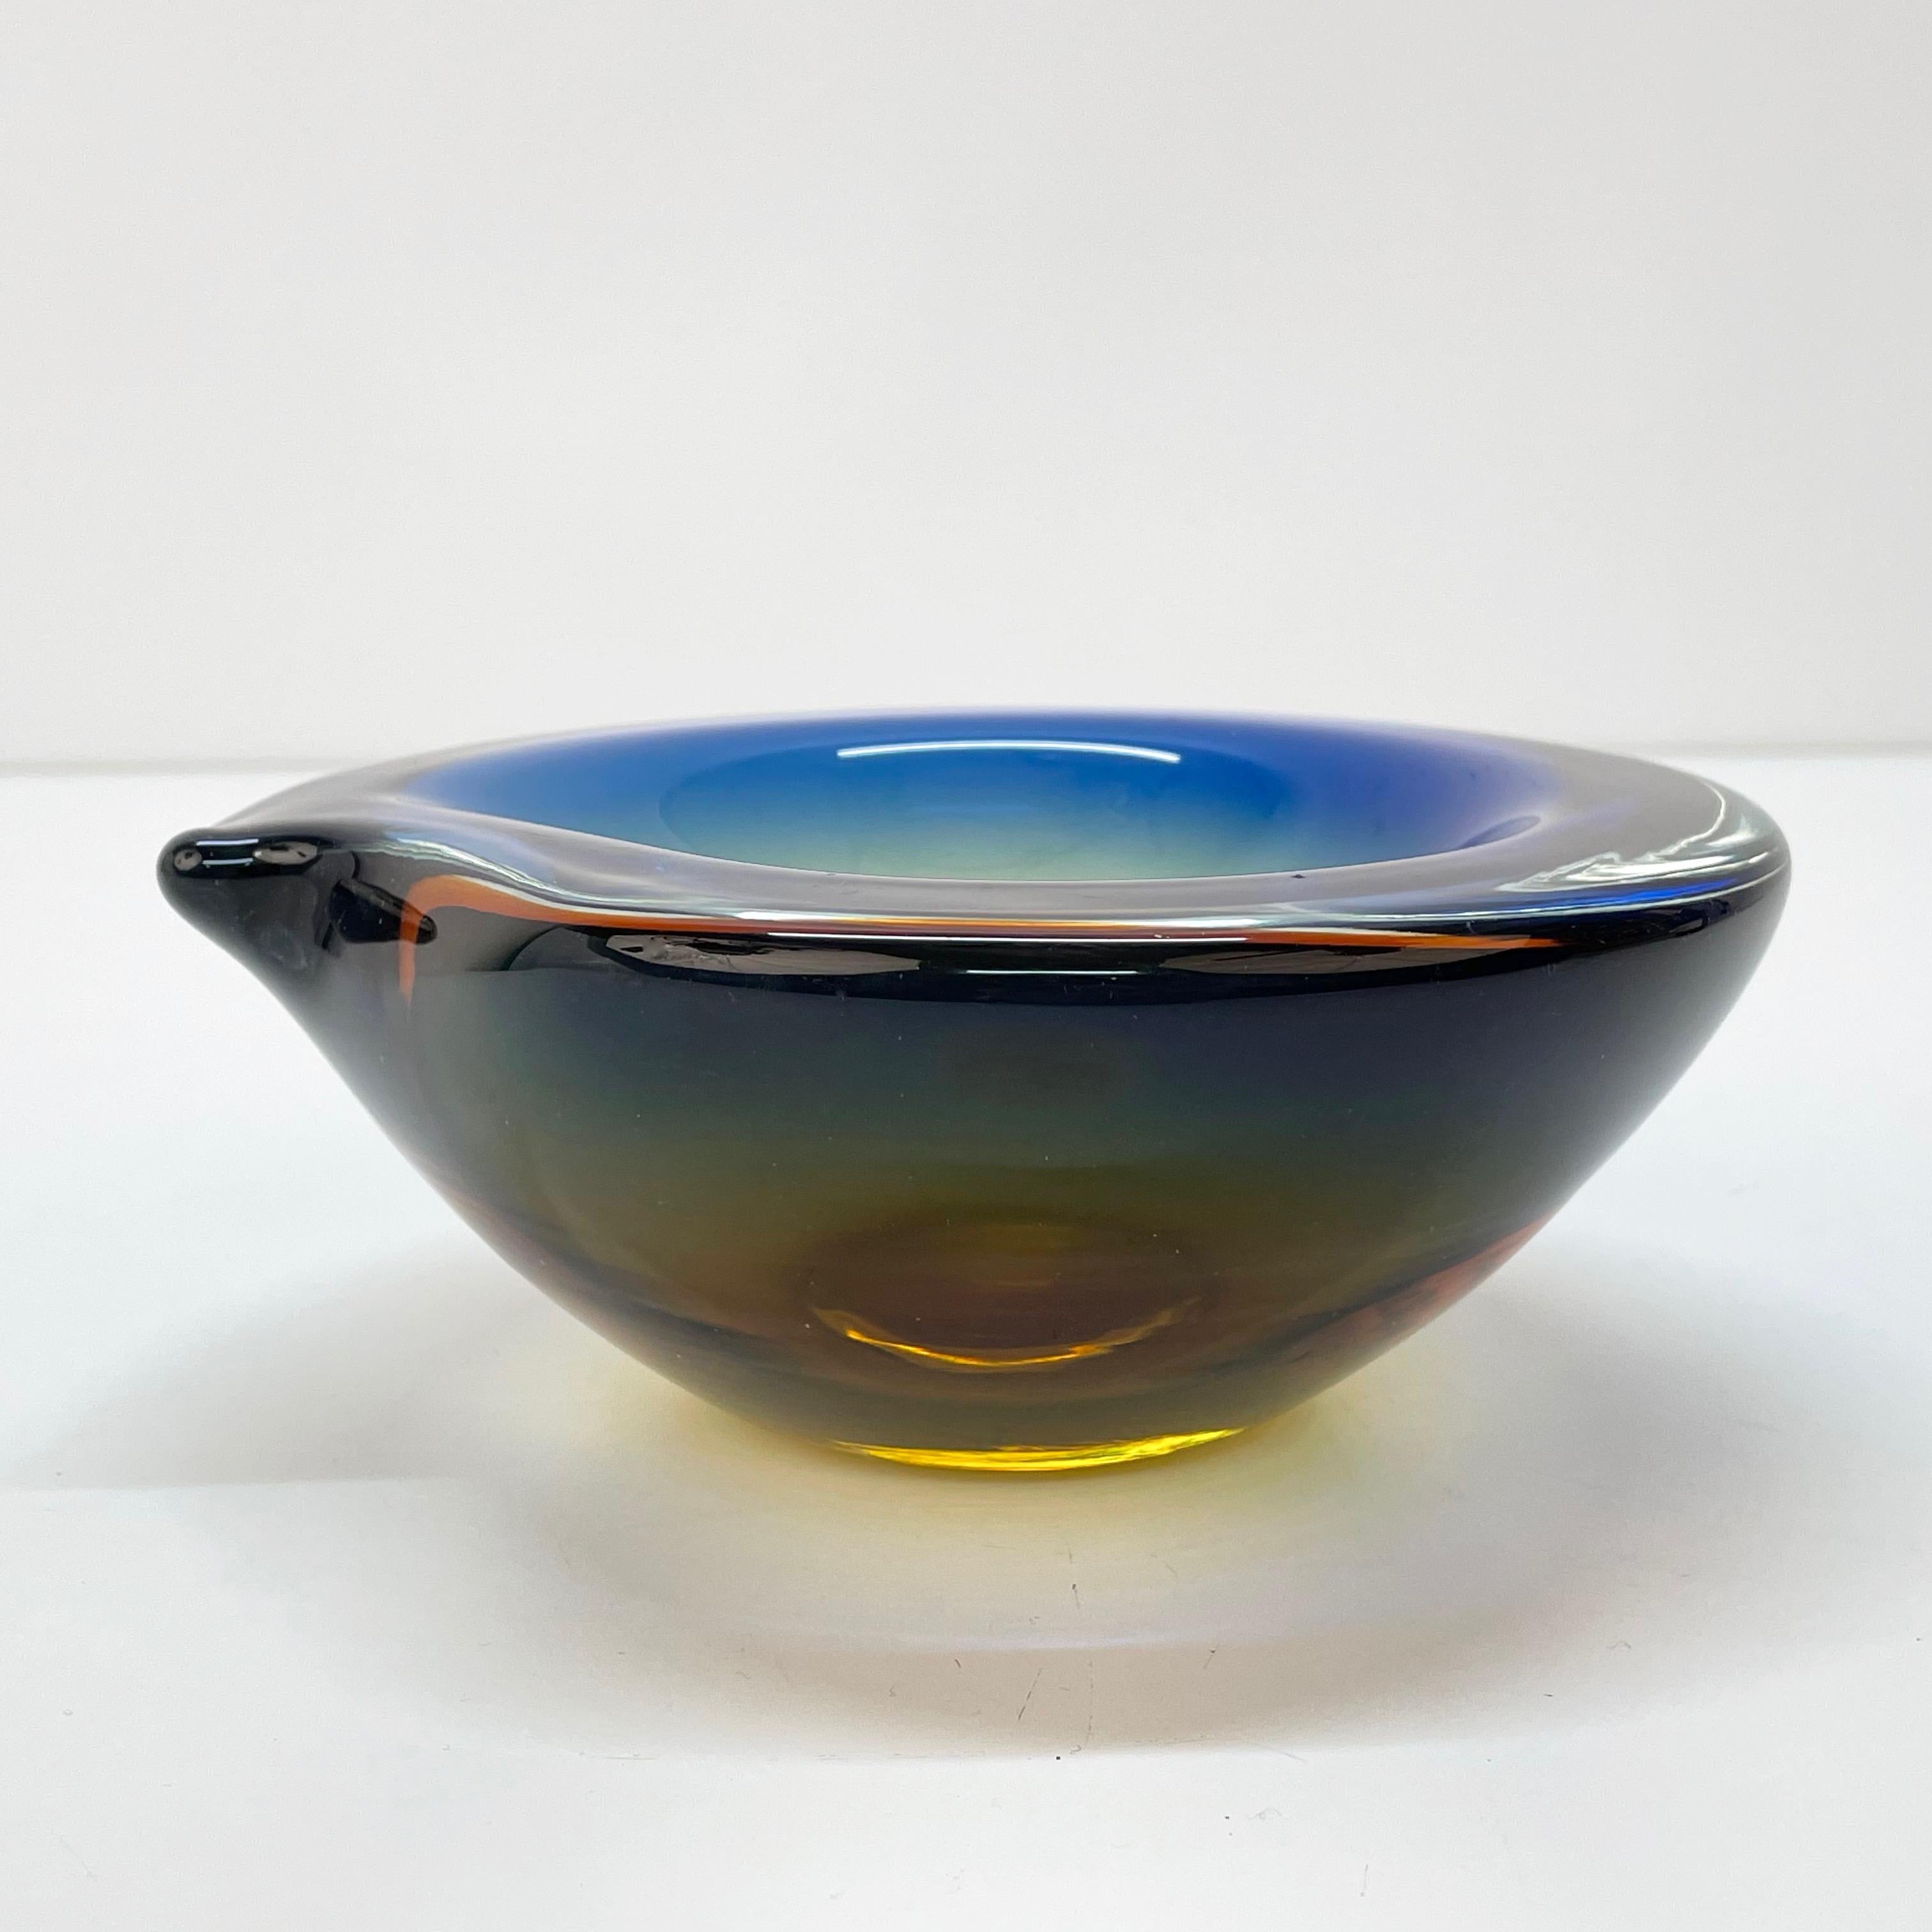 Murano Ashtray or Bowl, Flavio Poli Submerged Glass Amber Blue, Italy, 1960 For Sale 6